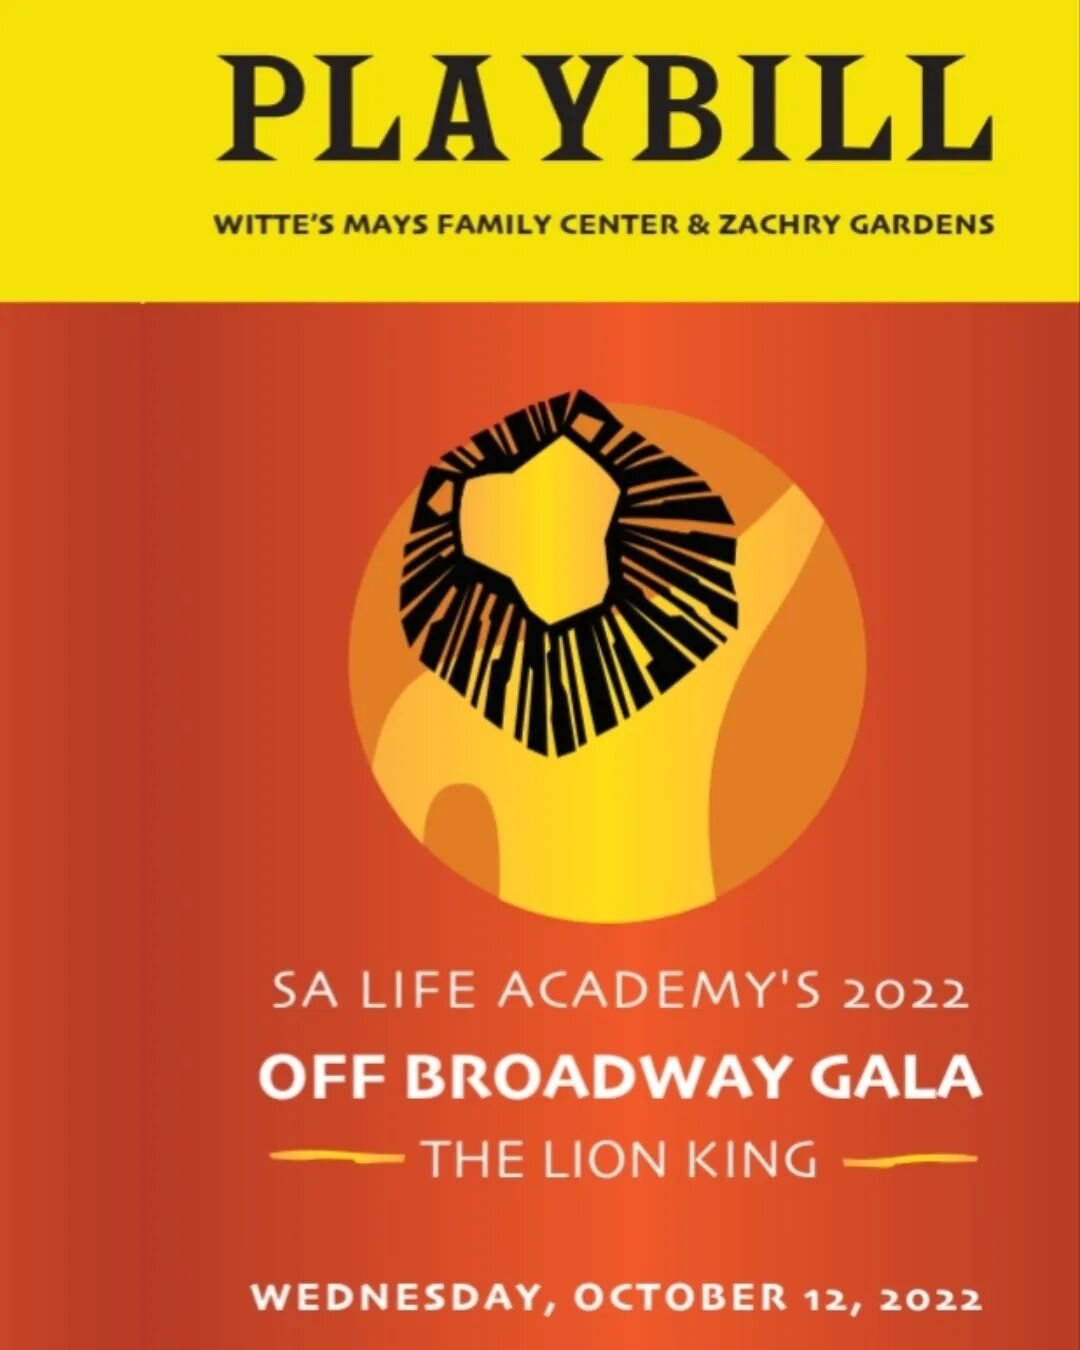 SA Life Academy's 2022 Off Broadway Gala is less than six weeks away!💛🦁🧡

We have one table remaining and a few individual tickets!

Please  email our Theater Manager at ellen@salifeacademy.org for more information.

#offbroadwaygala #lionking #fu